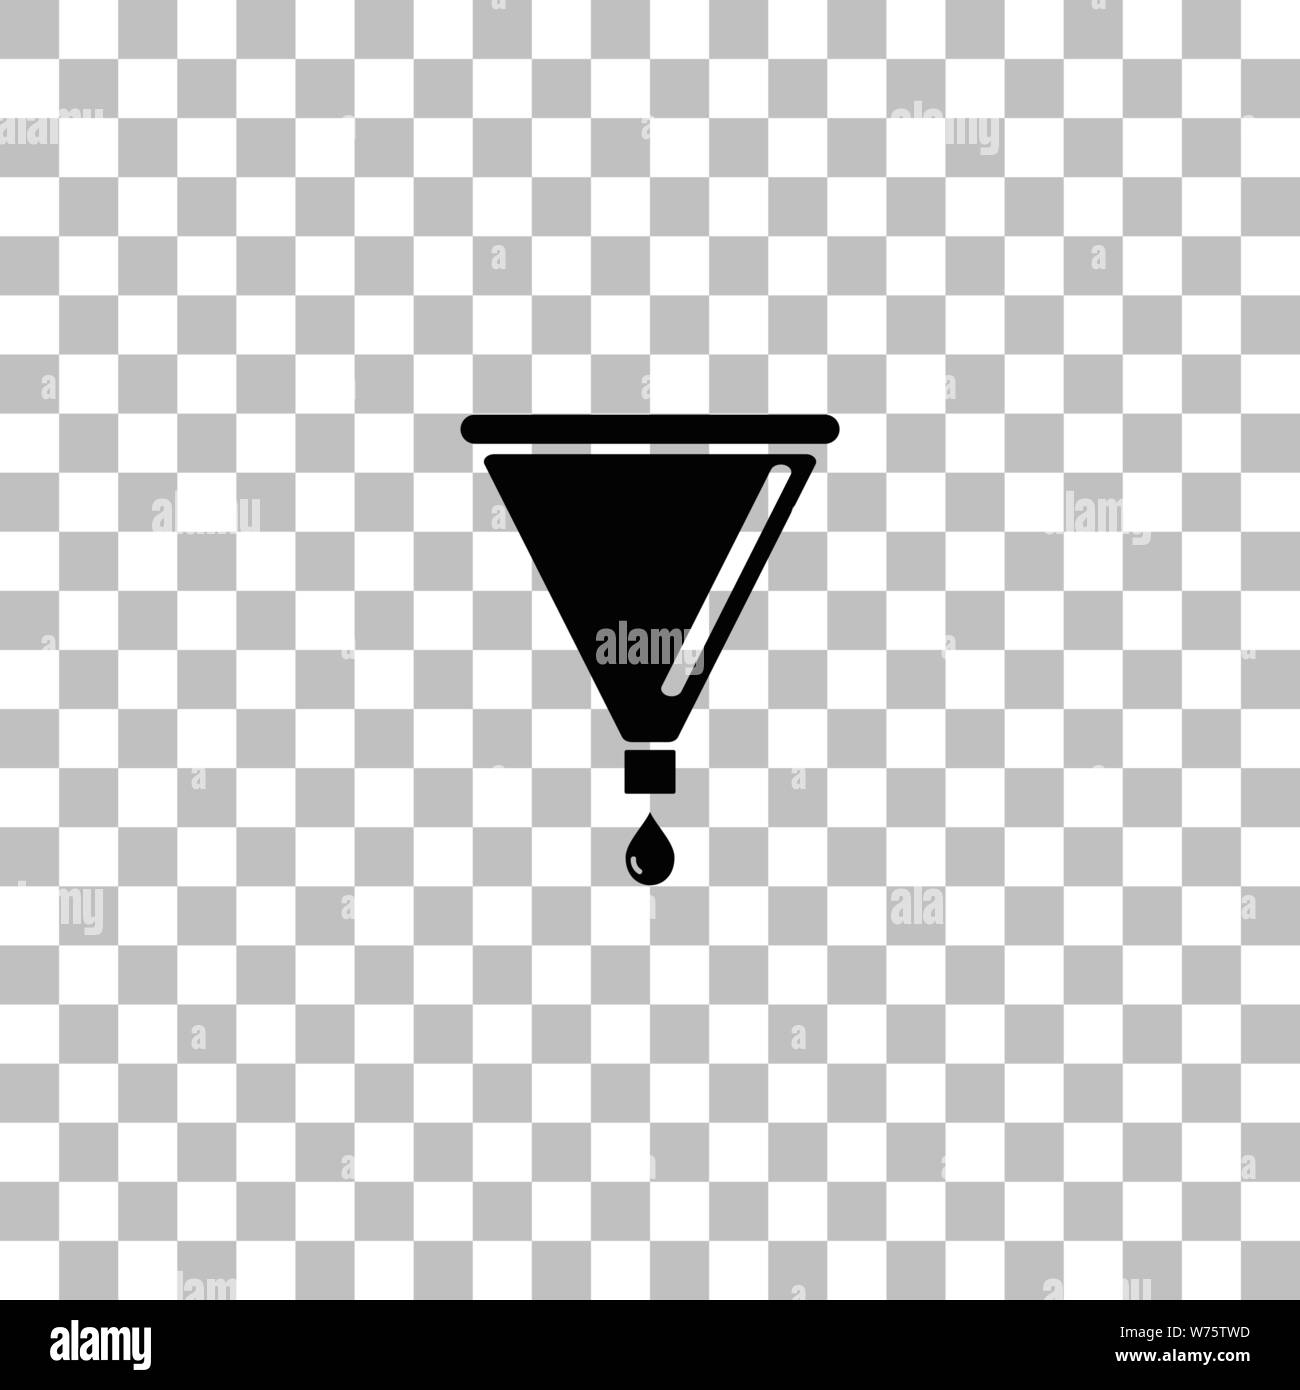 Filter funnel. Black flat icon on a transparent background. Pictogram for your project Stock Vector